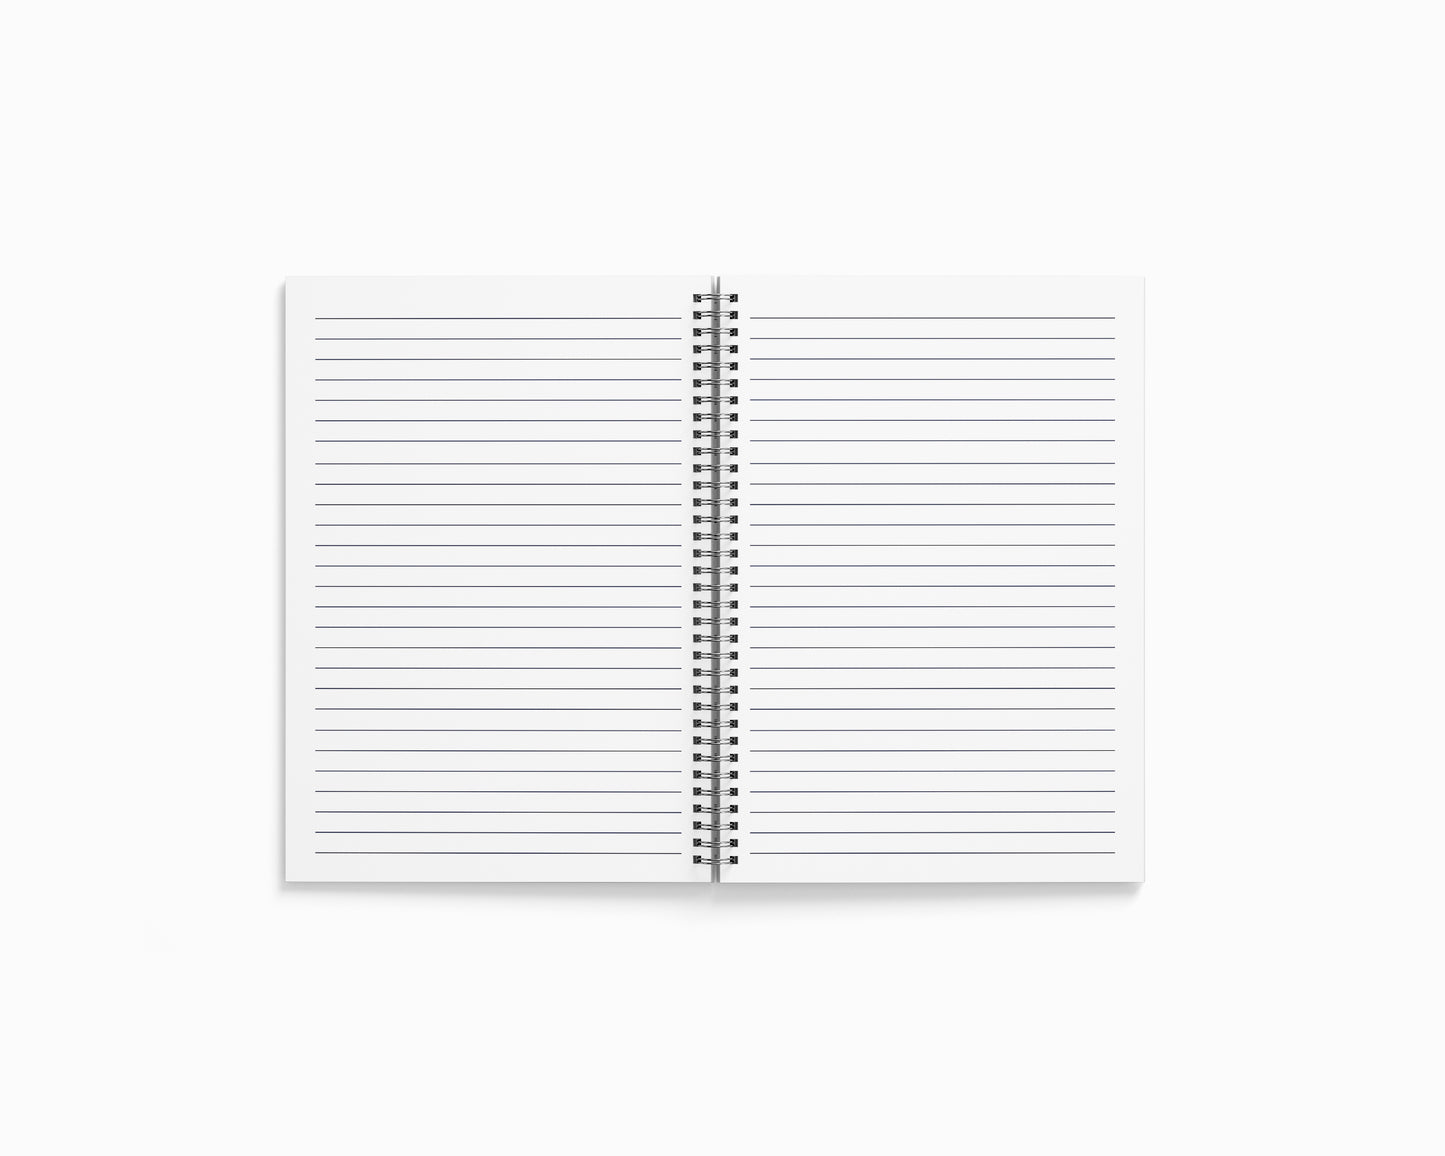 50 Number Notebook (Light Pink, A5 Size, 100 Pages, Ruled, 4 Pack)